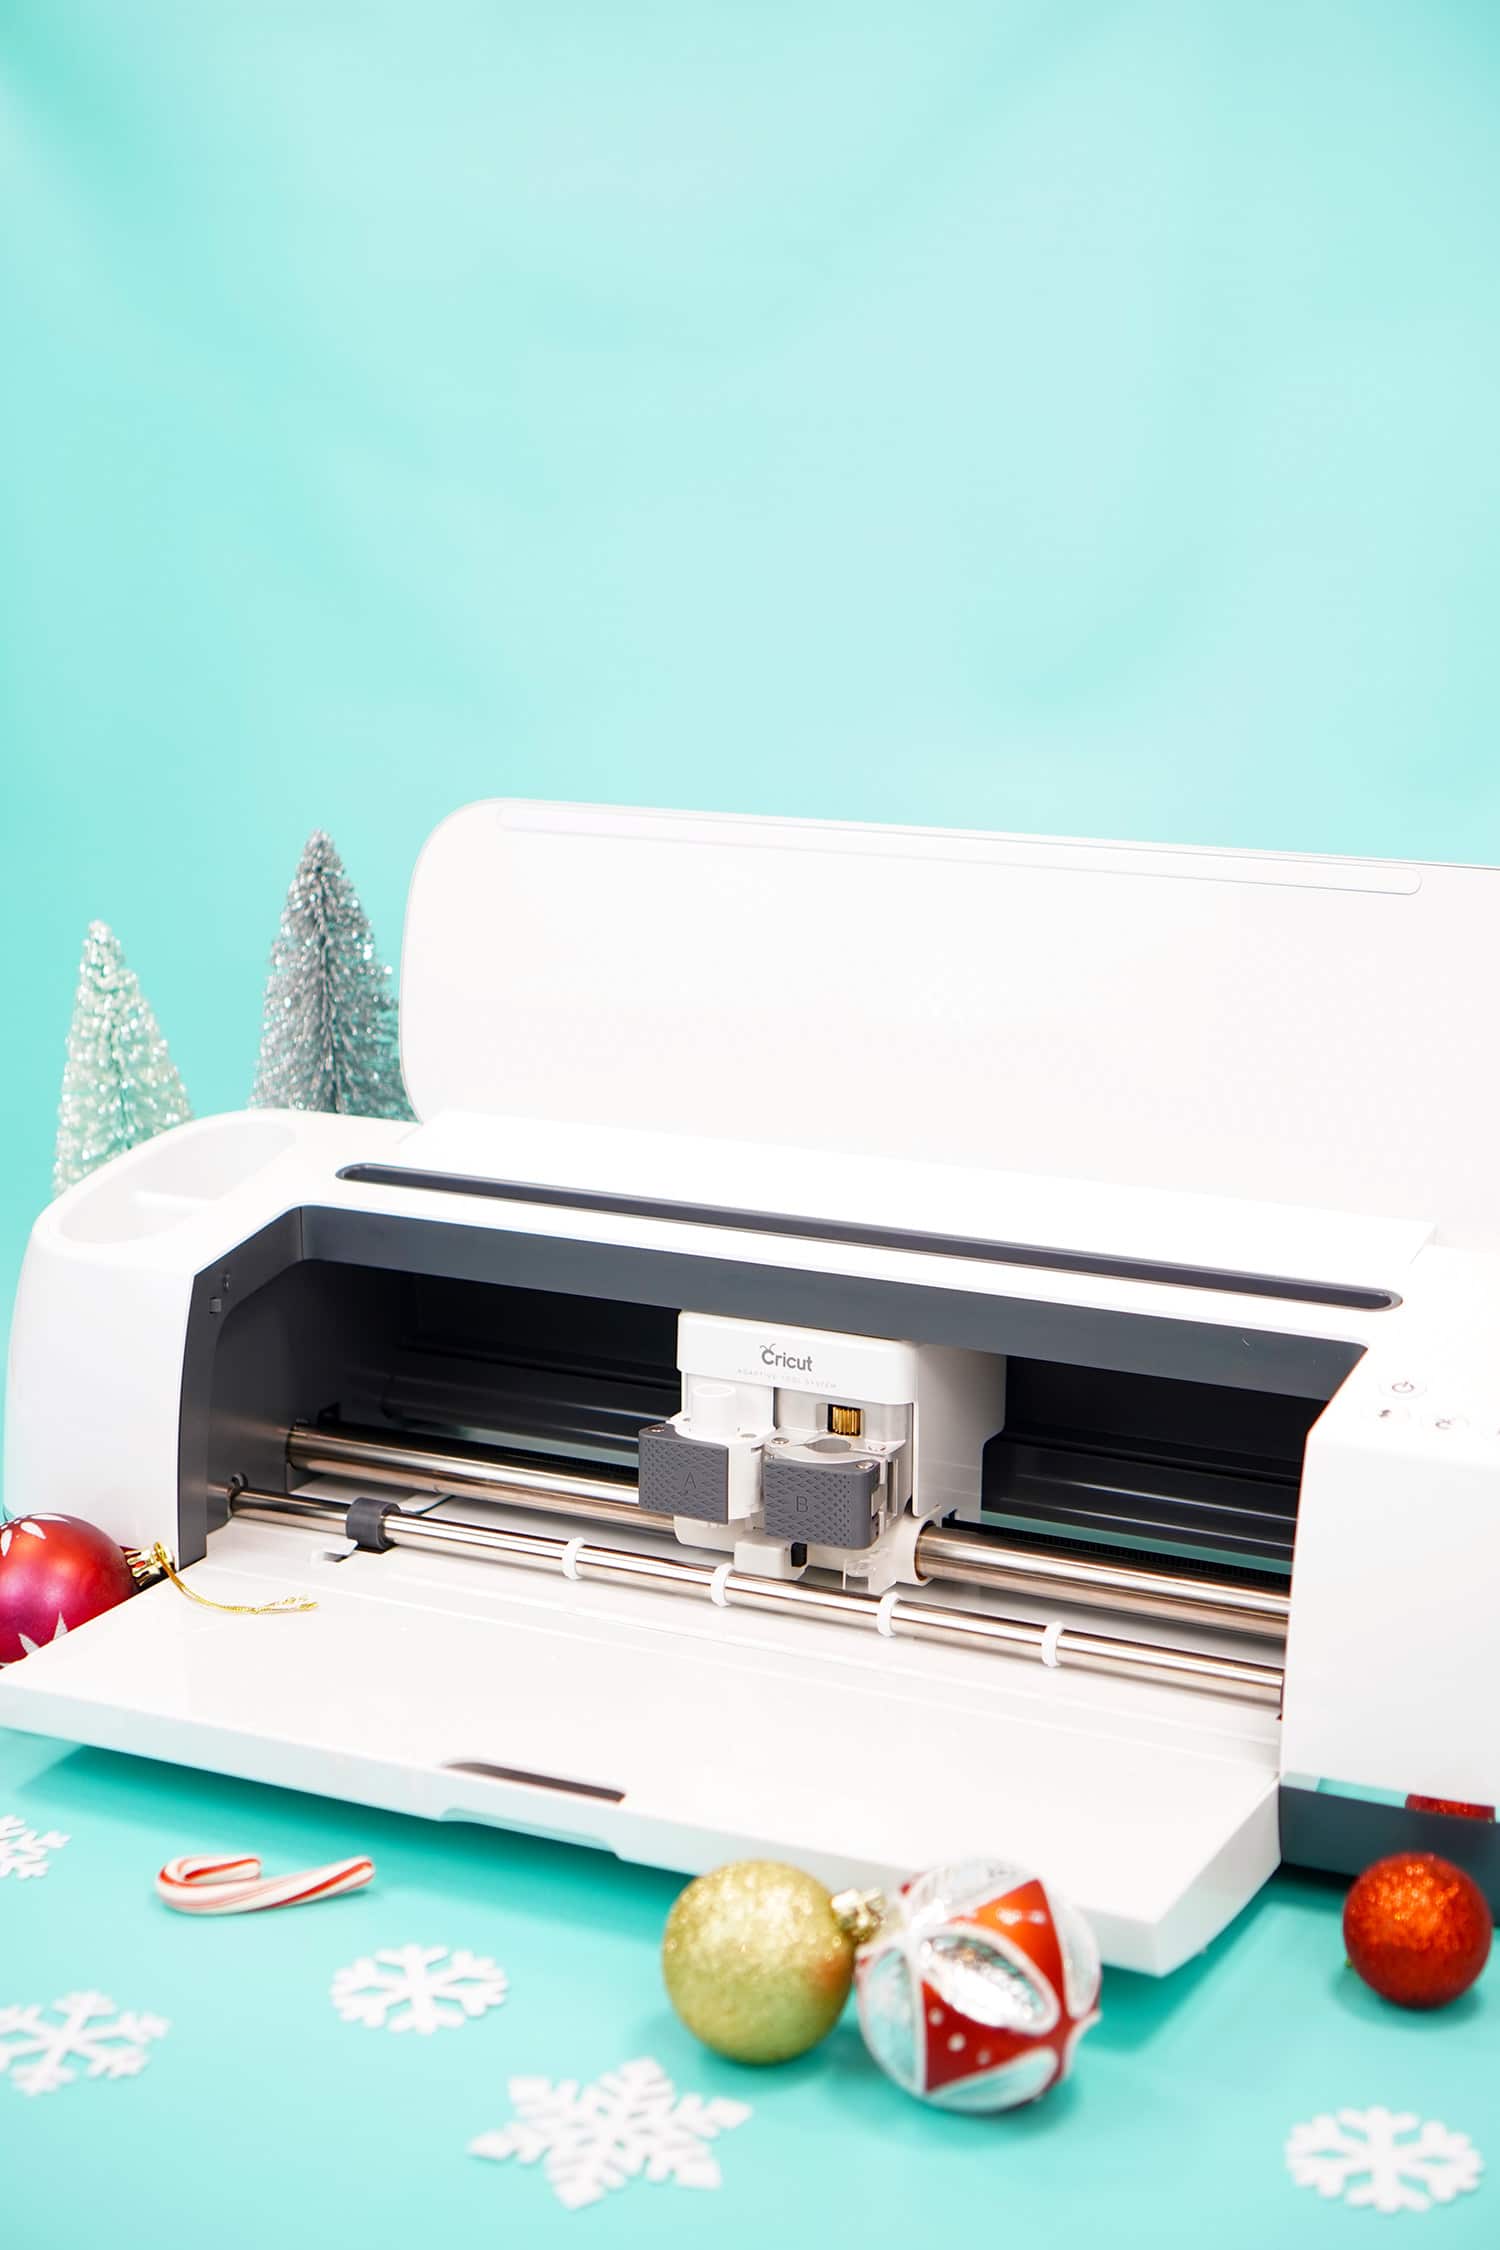 Cricut Maker machine on aqua background with white snowflakes and red and gold ornaments